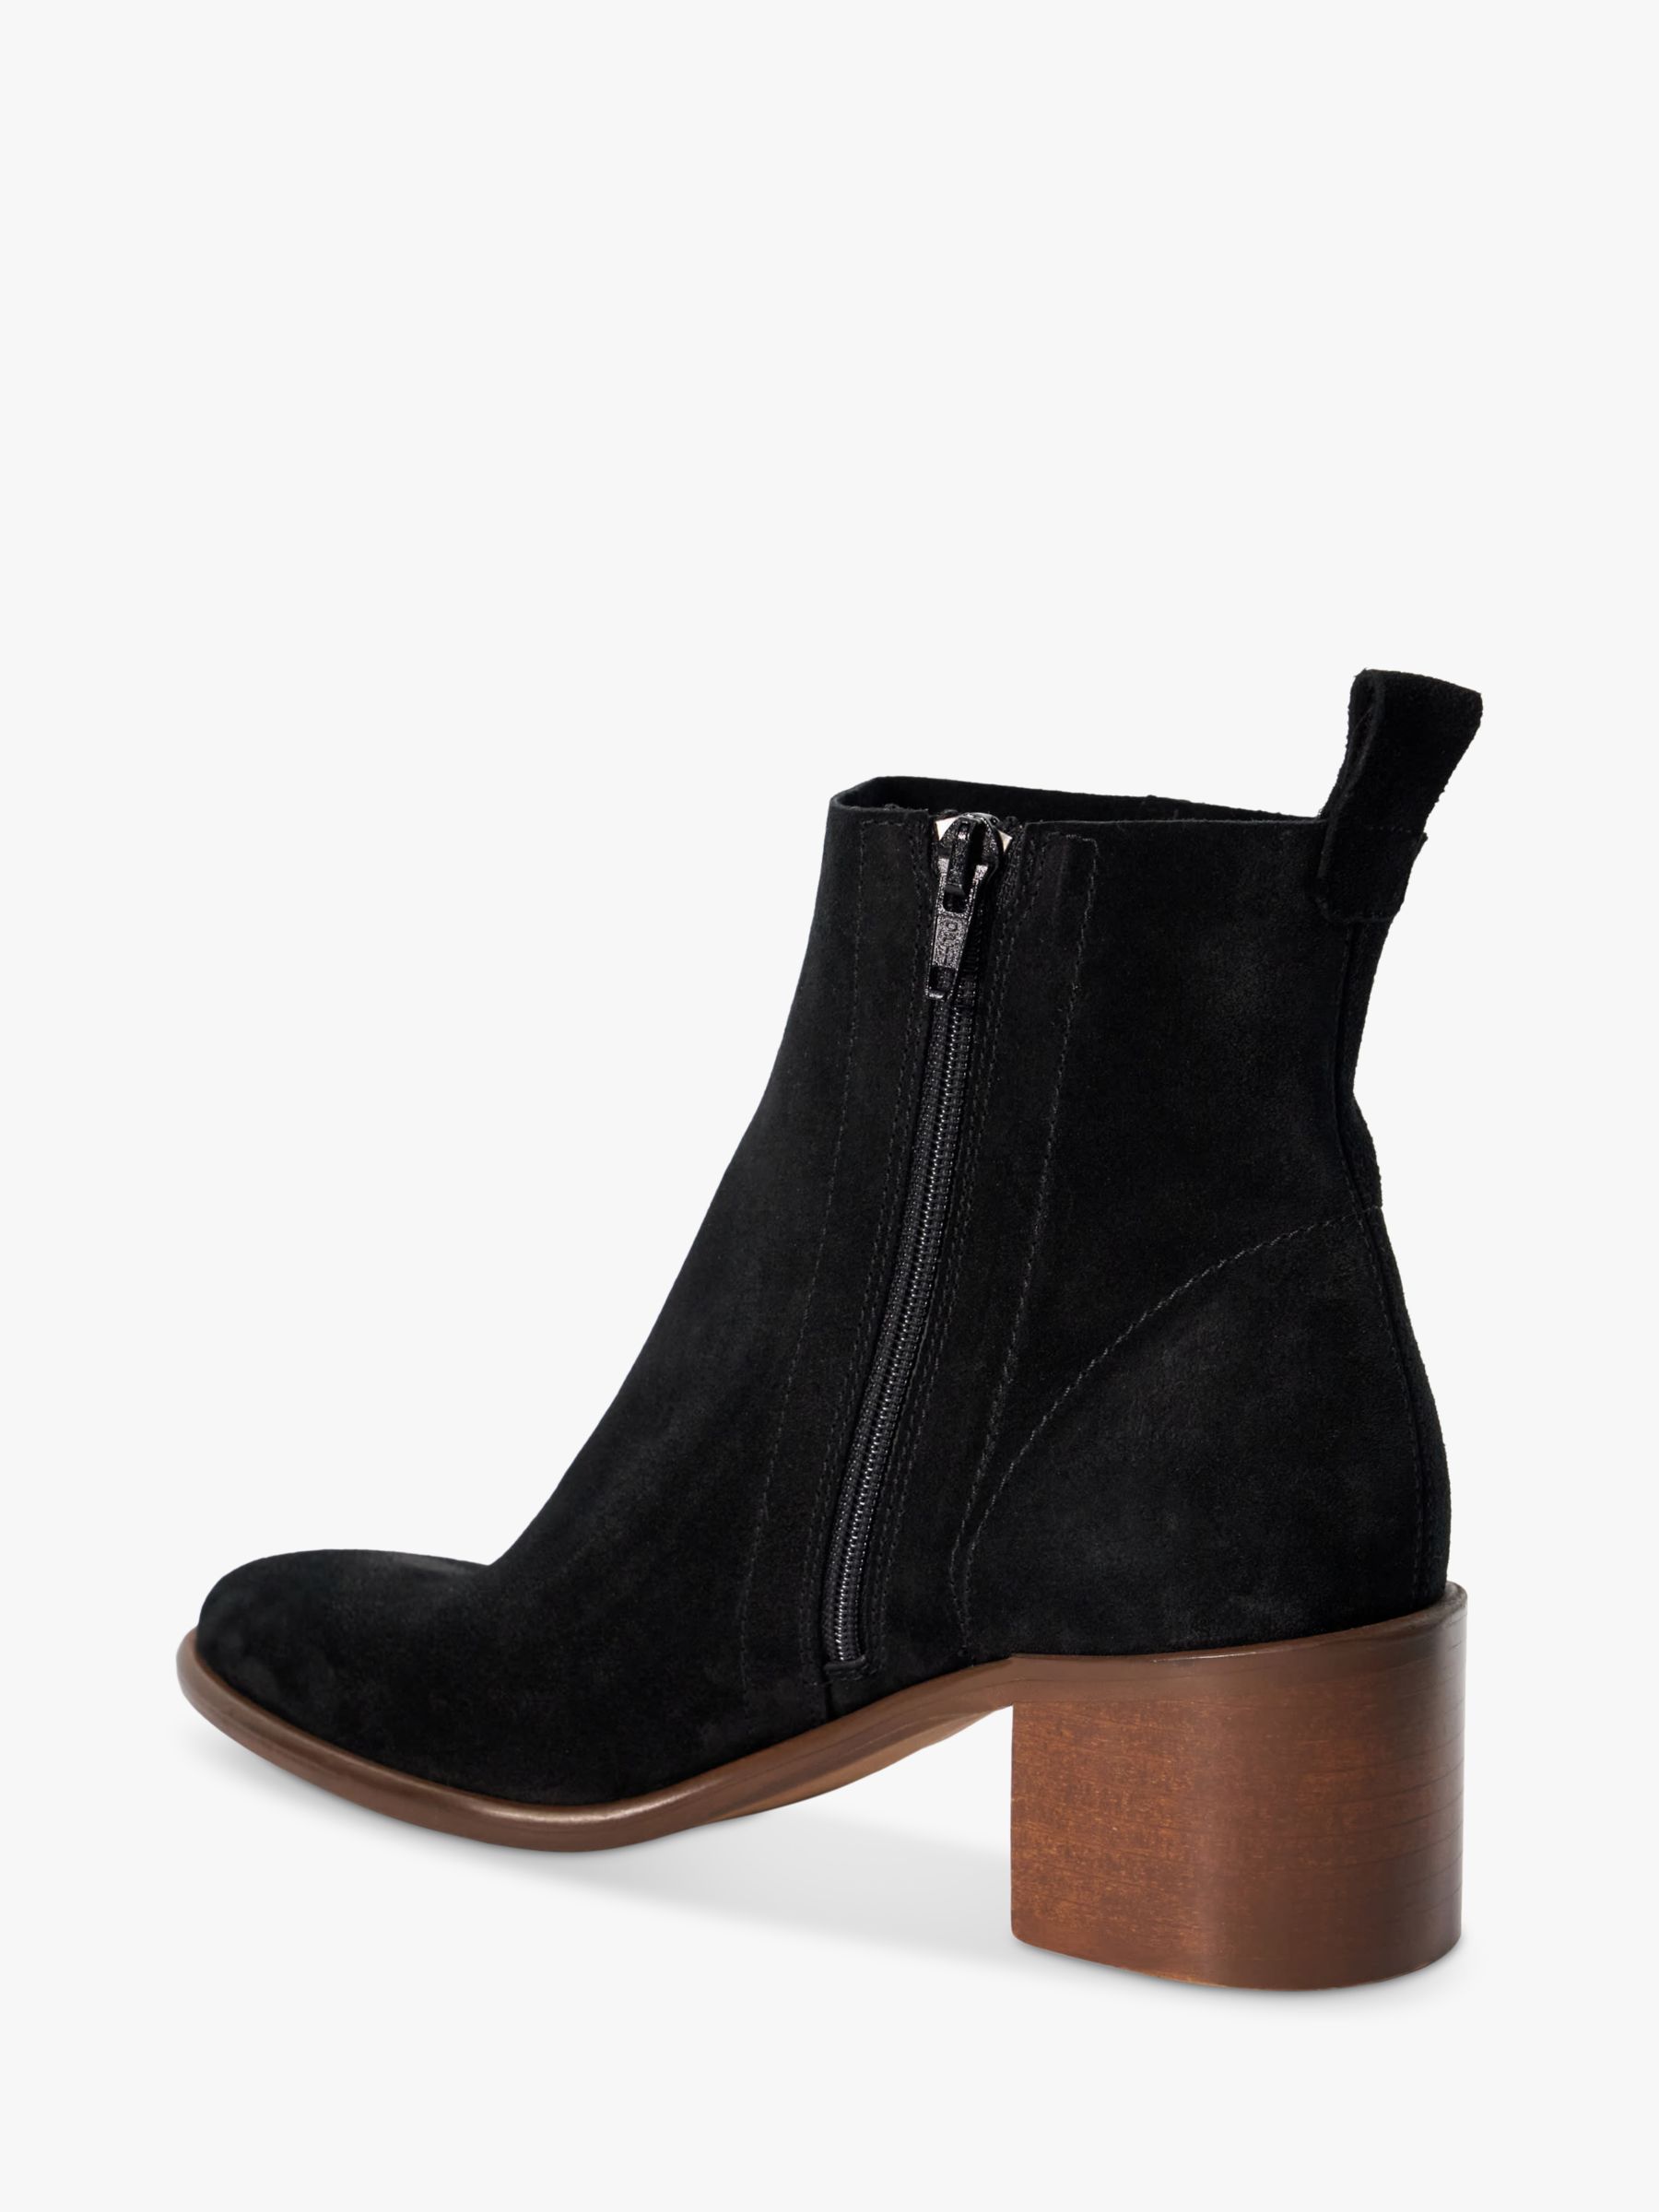 Dune Paprikaa Suede Ankle Boots, Black at John Lewis & Partners